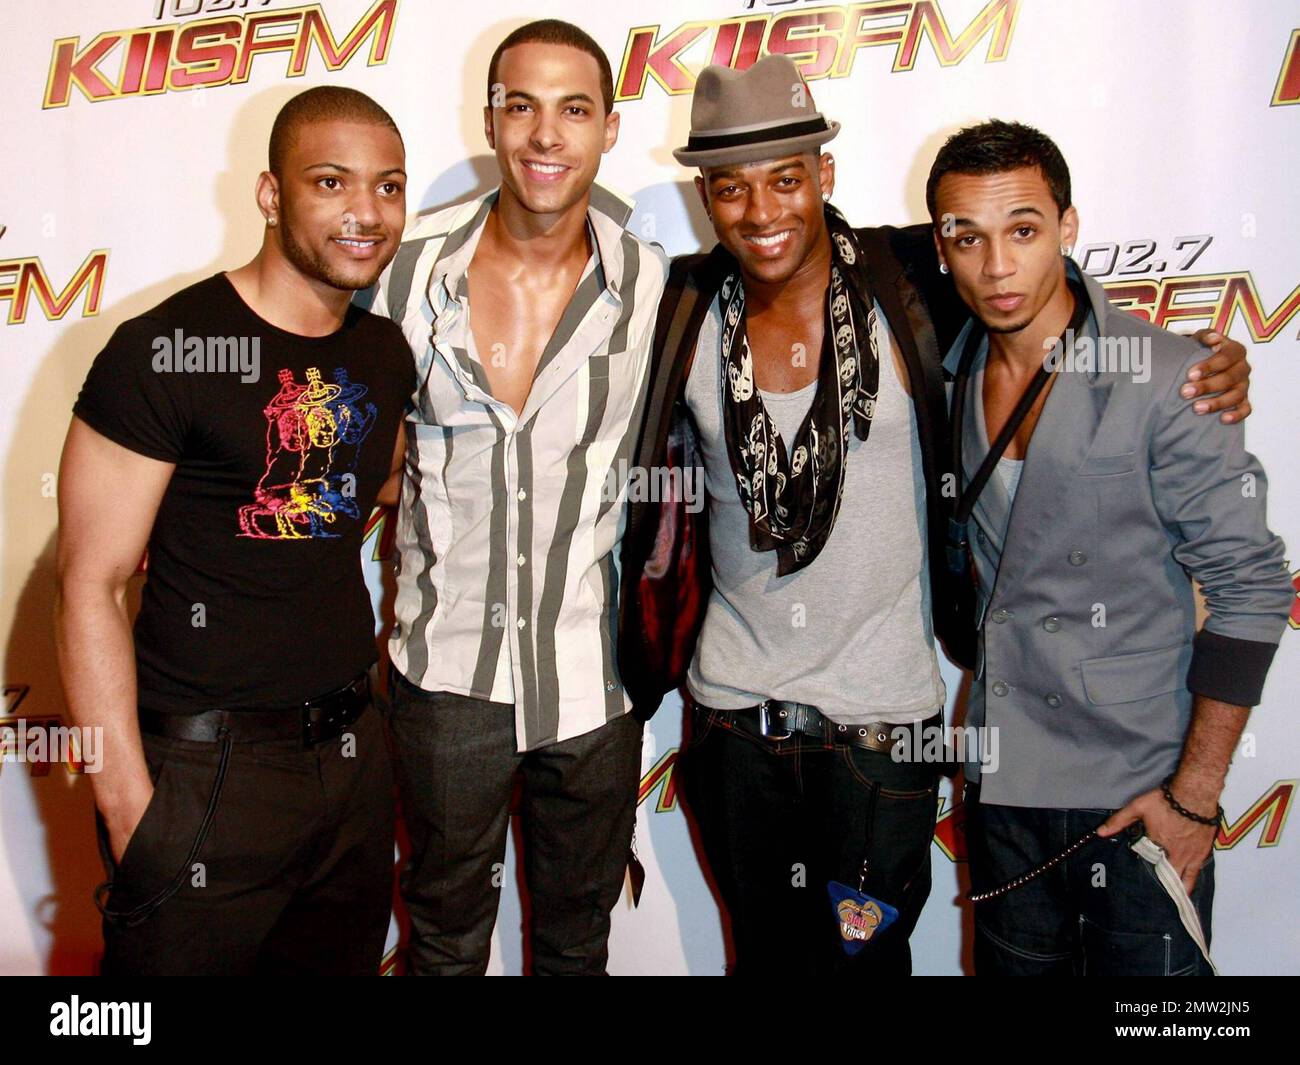 Brit boyband JLS (Jack the Lad Swing) Aston Merrygold, Marvin Humes, Jonathan 'JB' Gill and Oritse Williams walk the red carpet at the KIIS FM Wango Tango 2010 Music Festival at the Staples Center. Los Angeles, CA. 05/15/10. Stock Photo